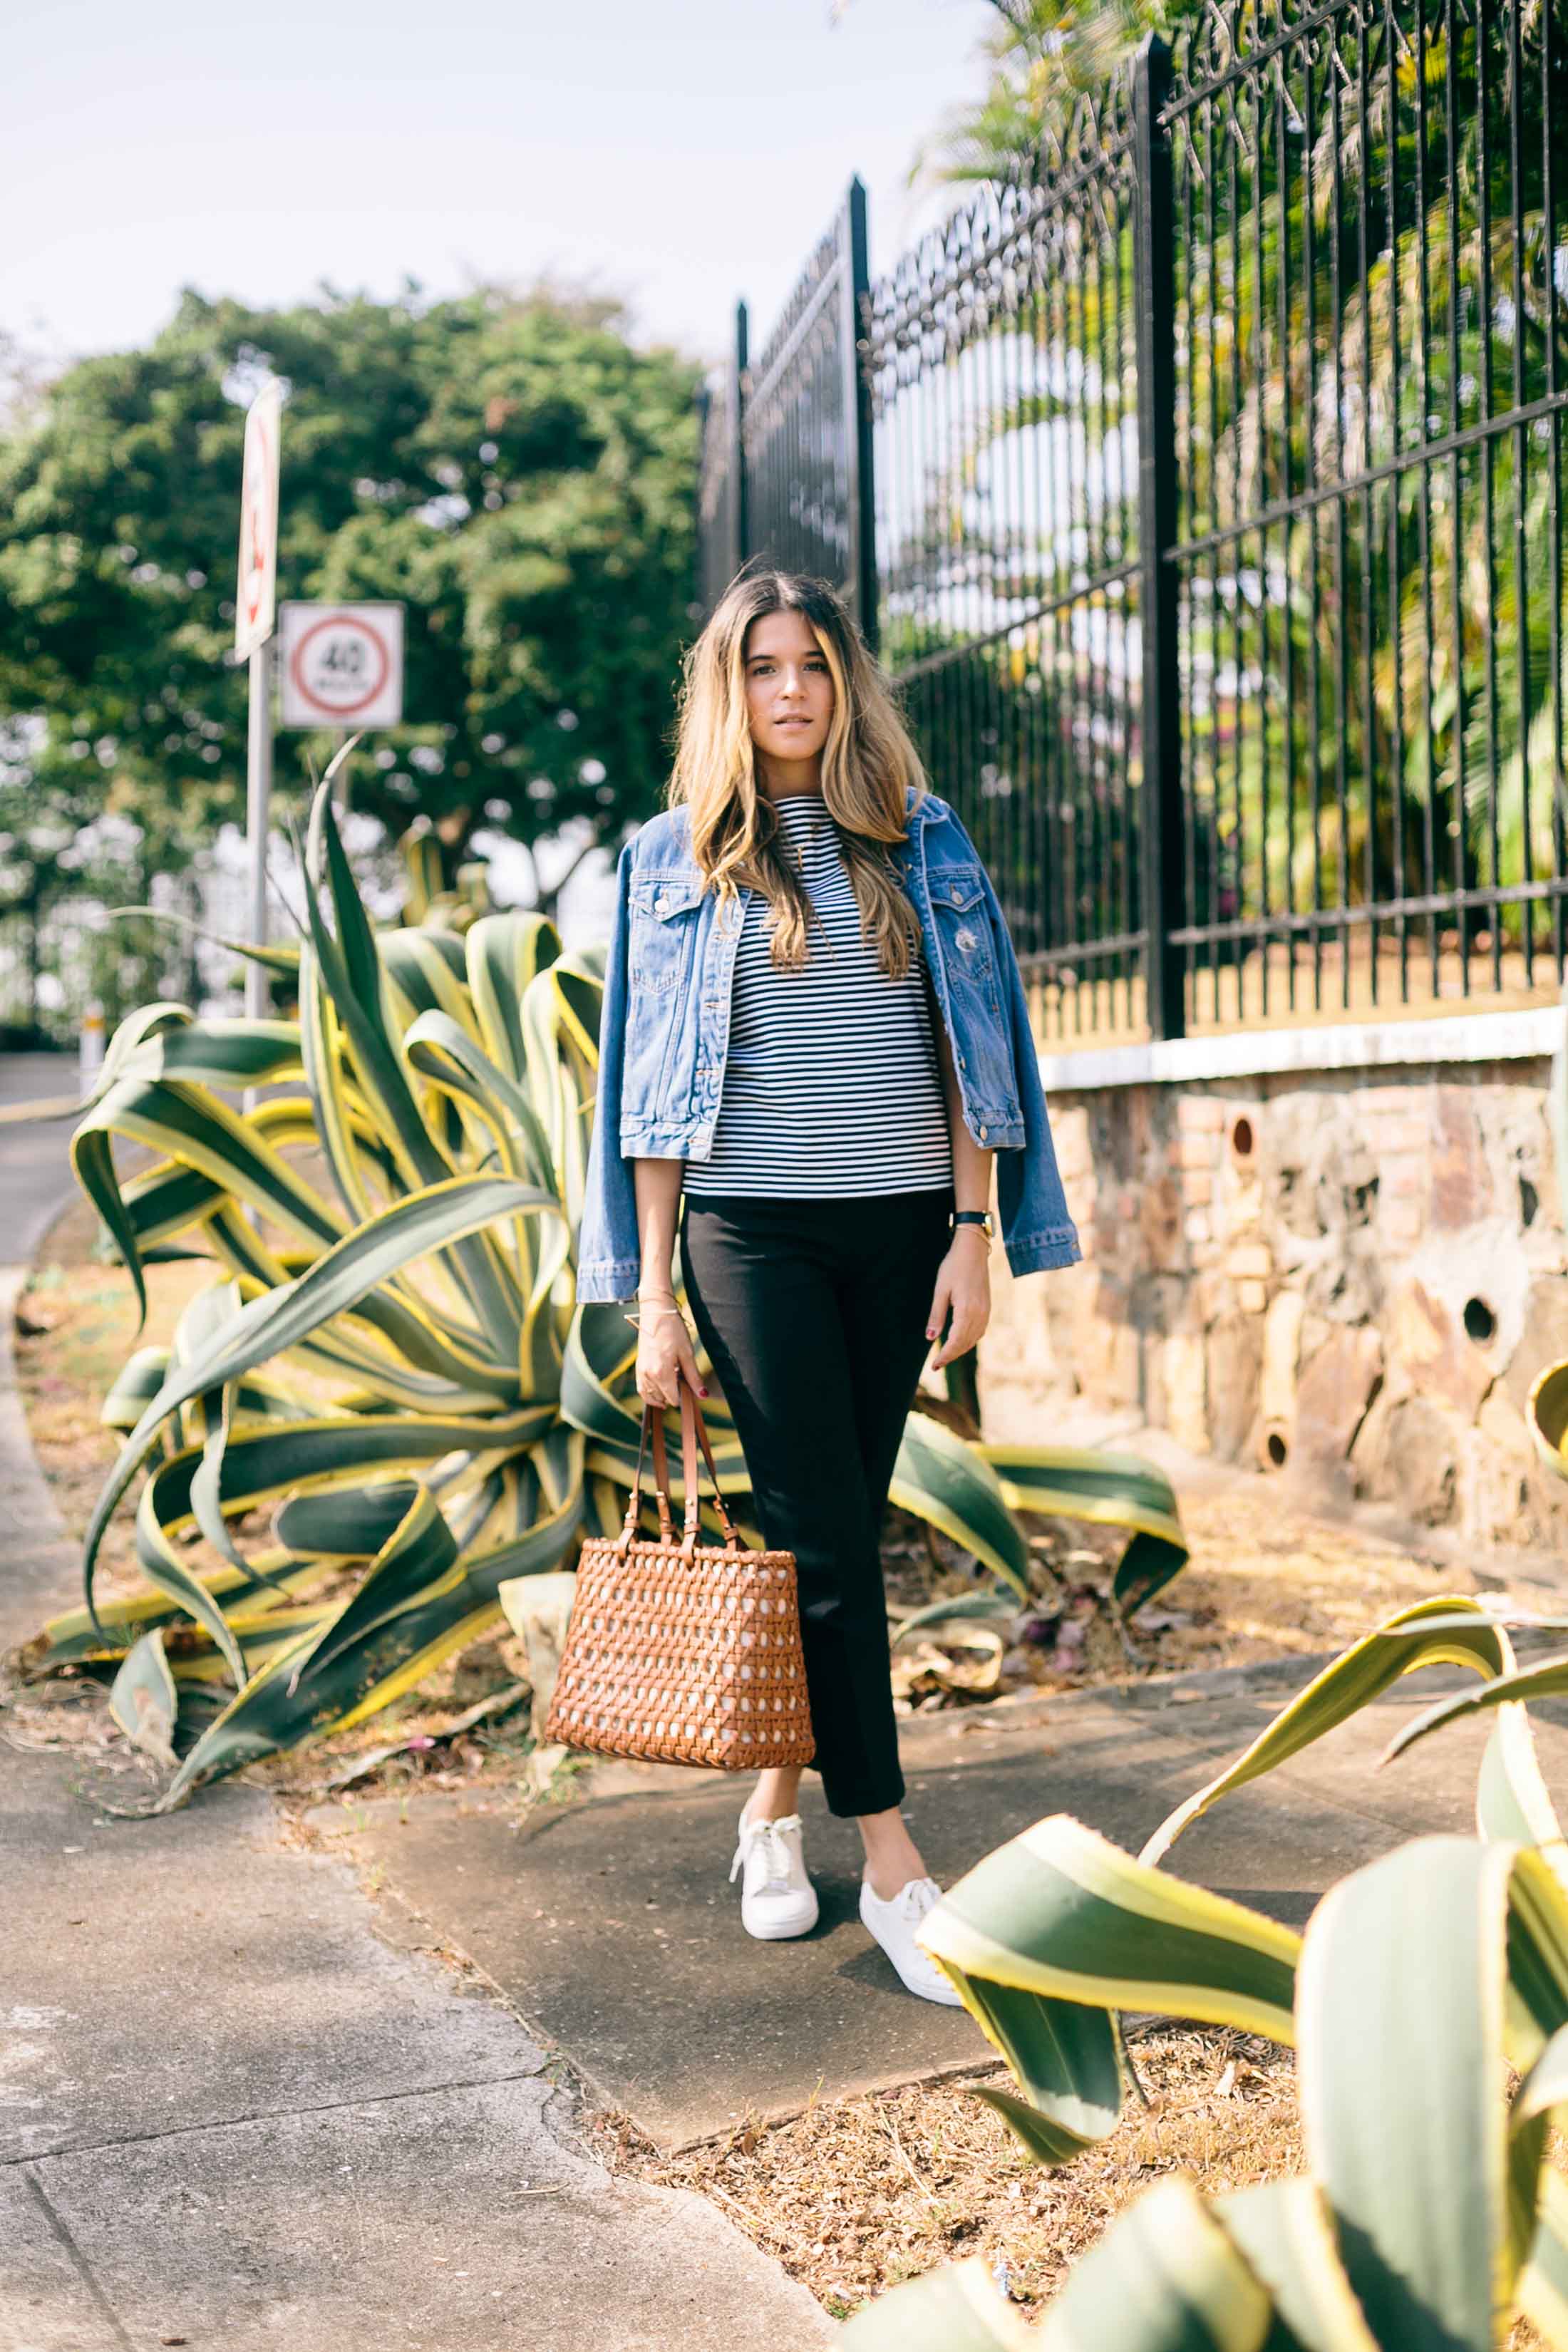 Maristella wears a casual and easy everyday outfit with a striped t-shirt, black skinny pants, white sneakers, denim jacket and tan leather tote bag.